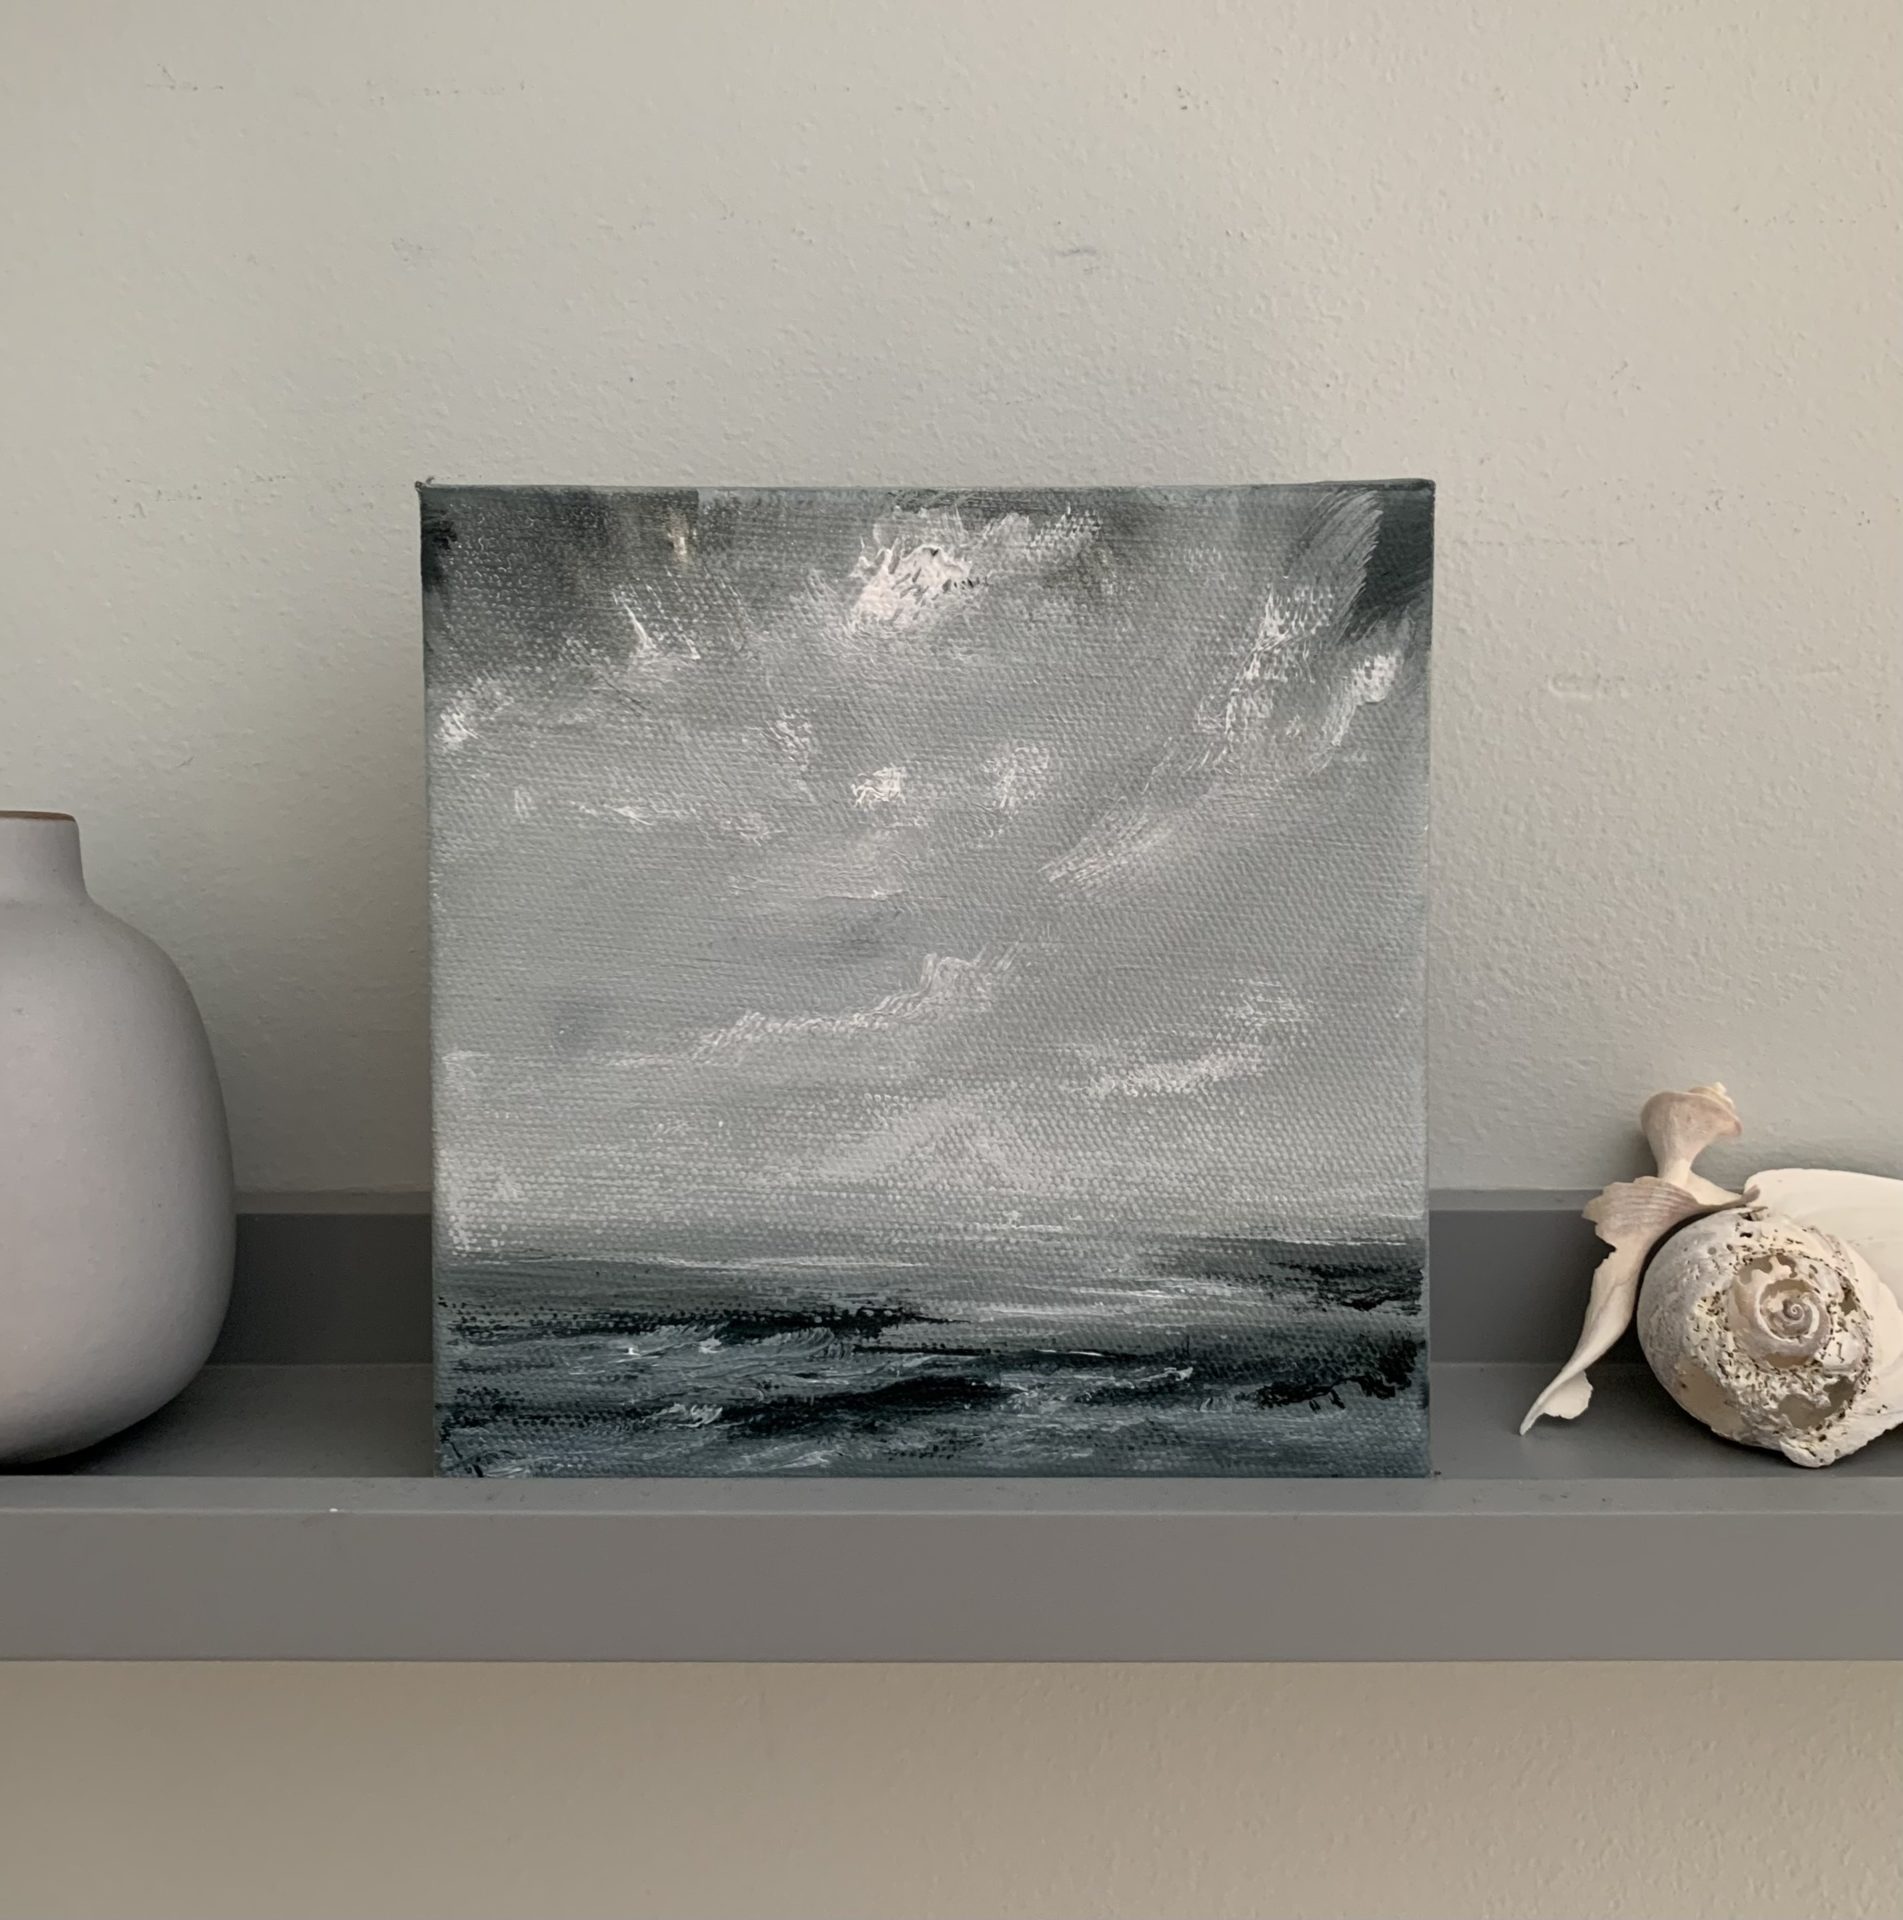 Original seascape oil painting by Tisha Mark, "Wintry Seas No. 5" 6"x6" oil on canvas (2024), shown on a shelf with a small vase and seashells.